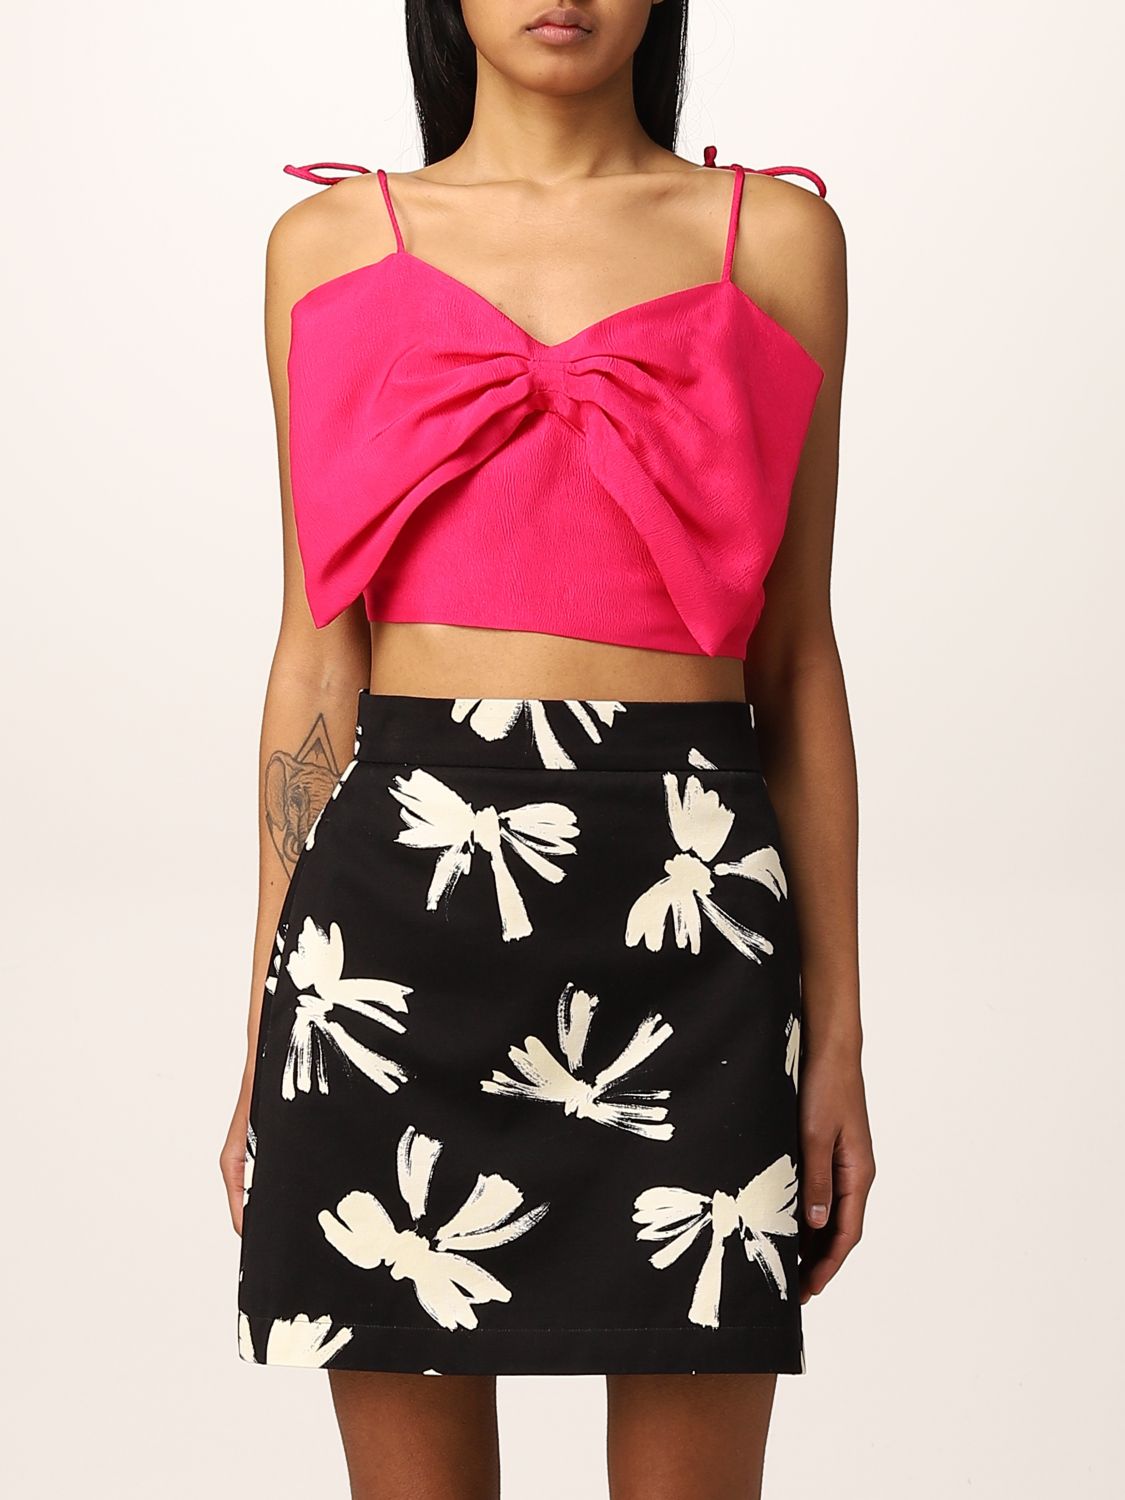 Msgm cropped top with big bow